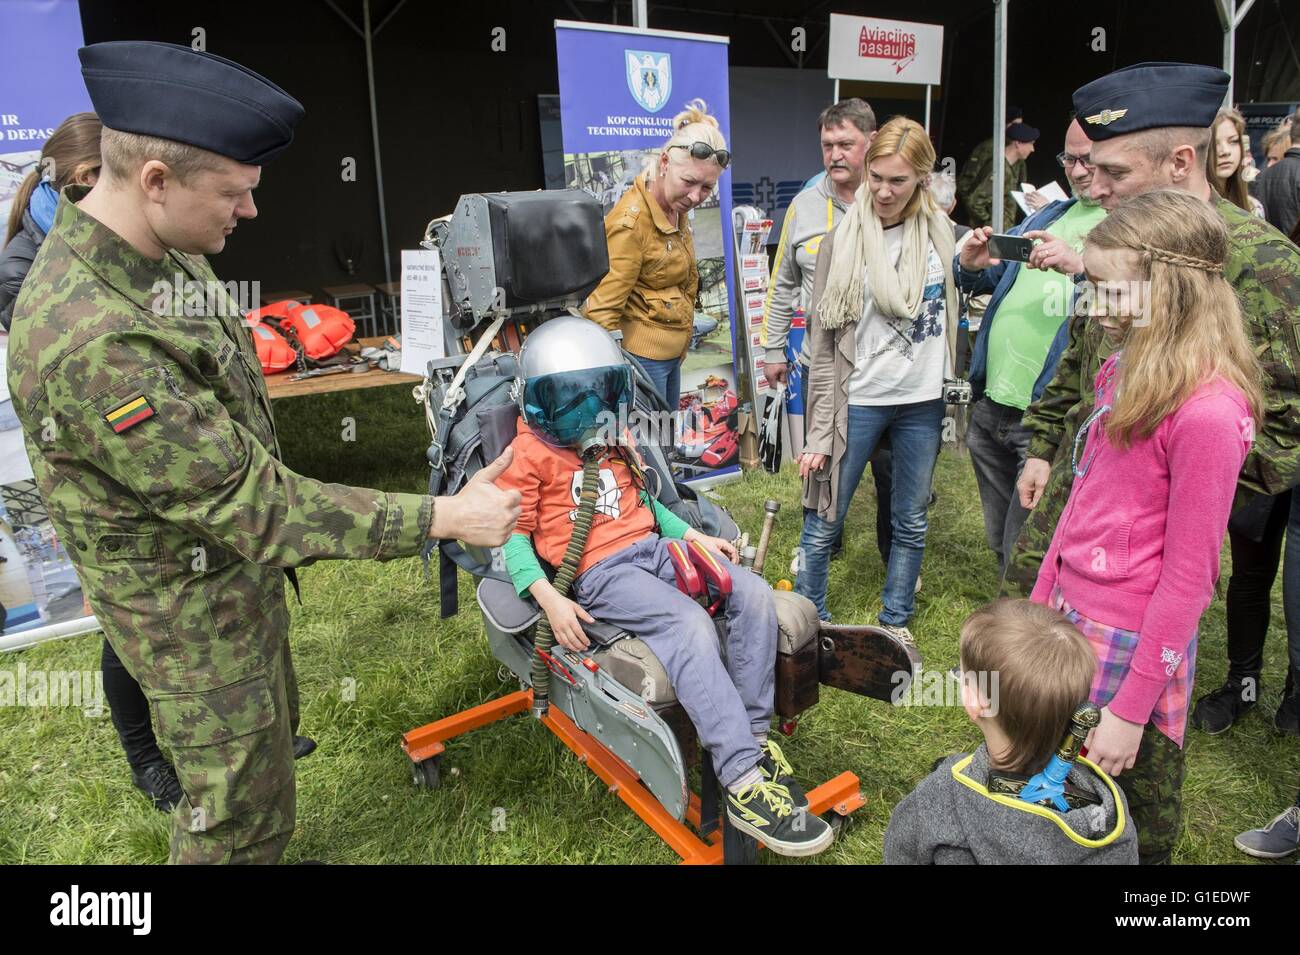 Vilnius, Lithuania. 14th May, 2016. A child is experiencing the seat of military aircraft in Vilnius, Lithuania, May 14, 2016. Lithuania celebrates Armed Forces and Public Unity Day in it's captial on Saturday. Troops of Lithuania, Germany, U.S., Luxembourg, Portugal, etc. brought their light weapons, military vehicles and other equipment to the public. Fighting Falcon F-16 of Portuguese air force and Black Hawk of the U.S. air force participated in the performance. Credit:  Alfredas Pliadis/Xinhua/Alamy Live News Stock Photo